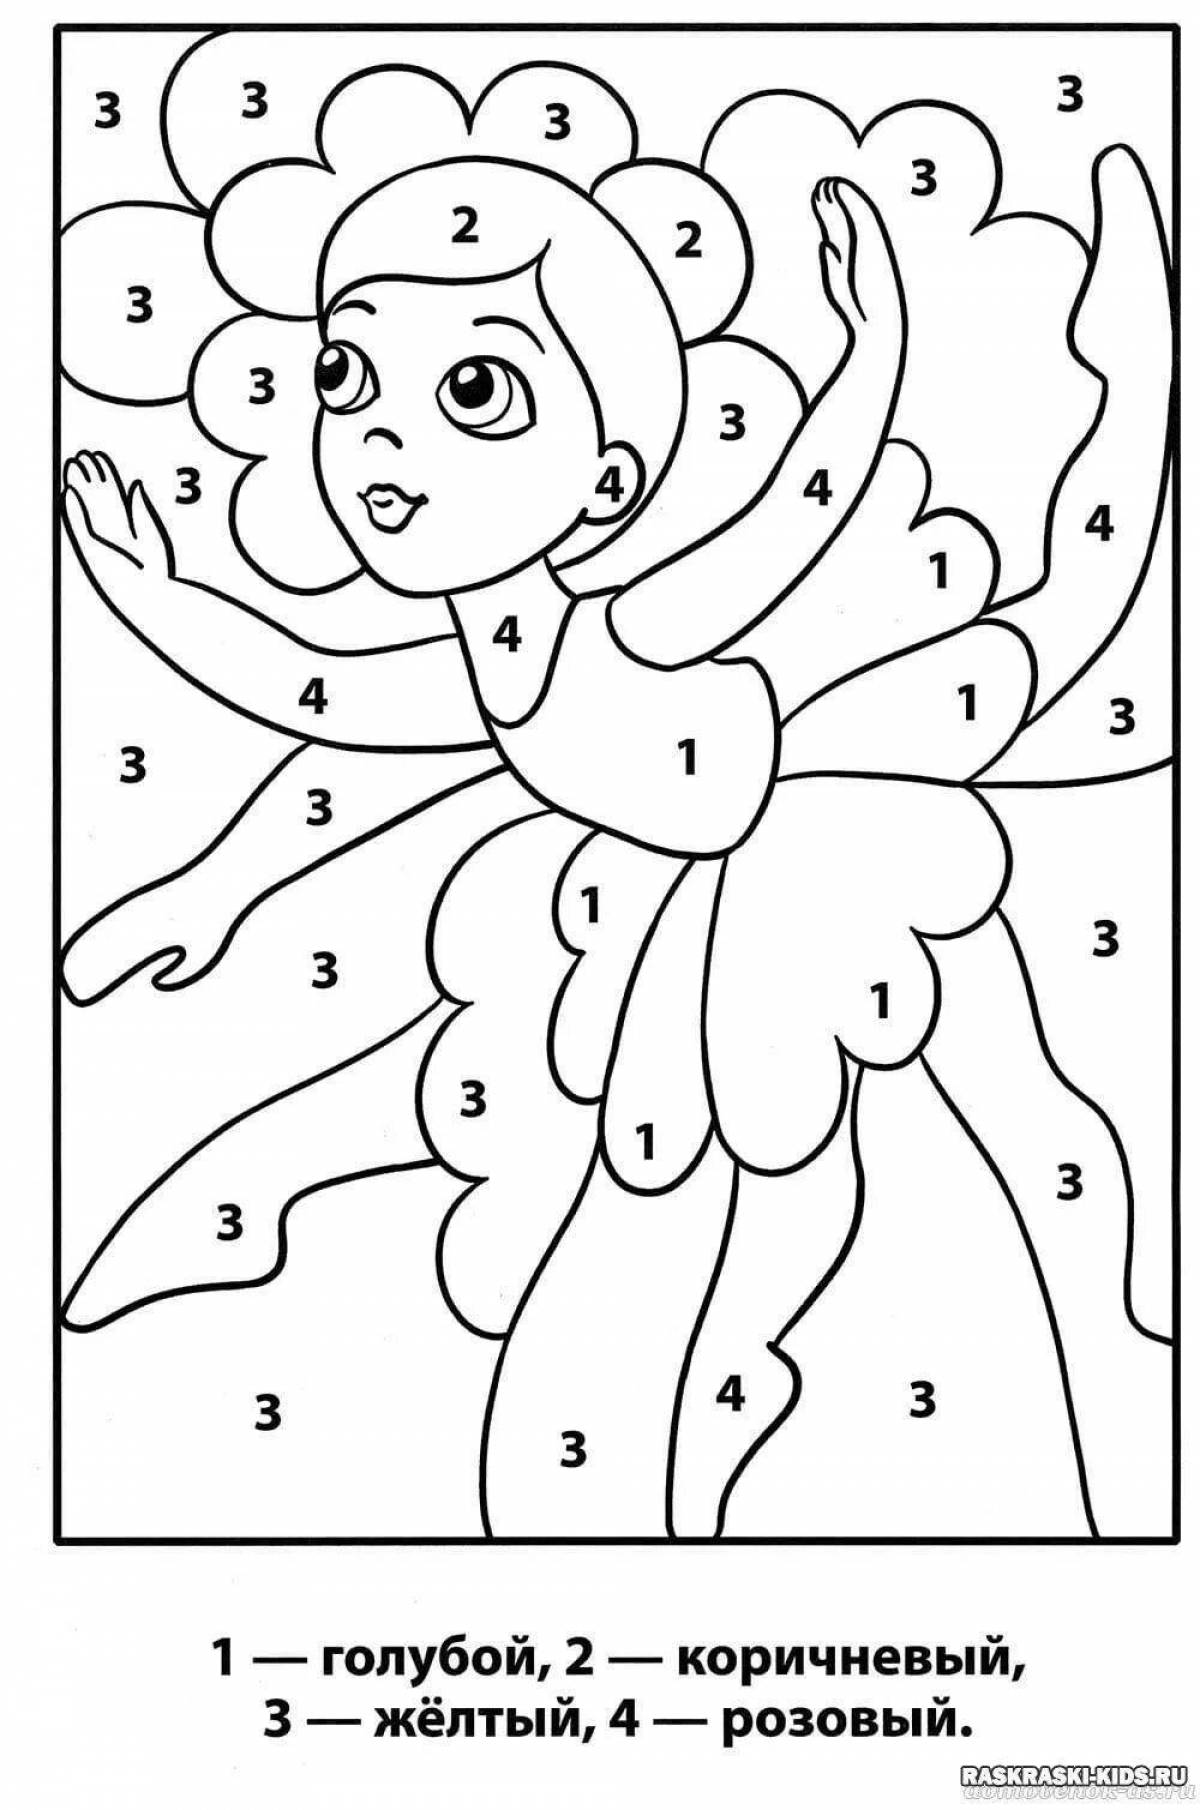 Playful coloring game for 4-5 year olds for girls